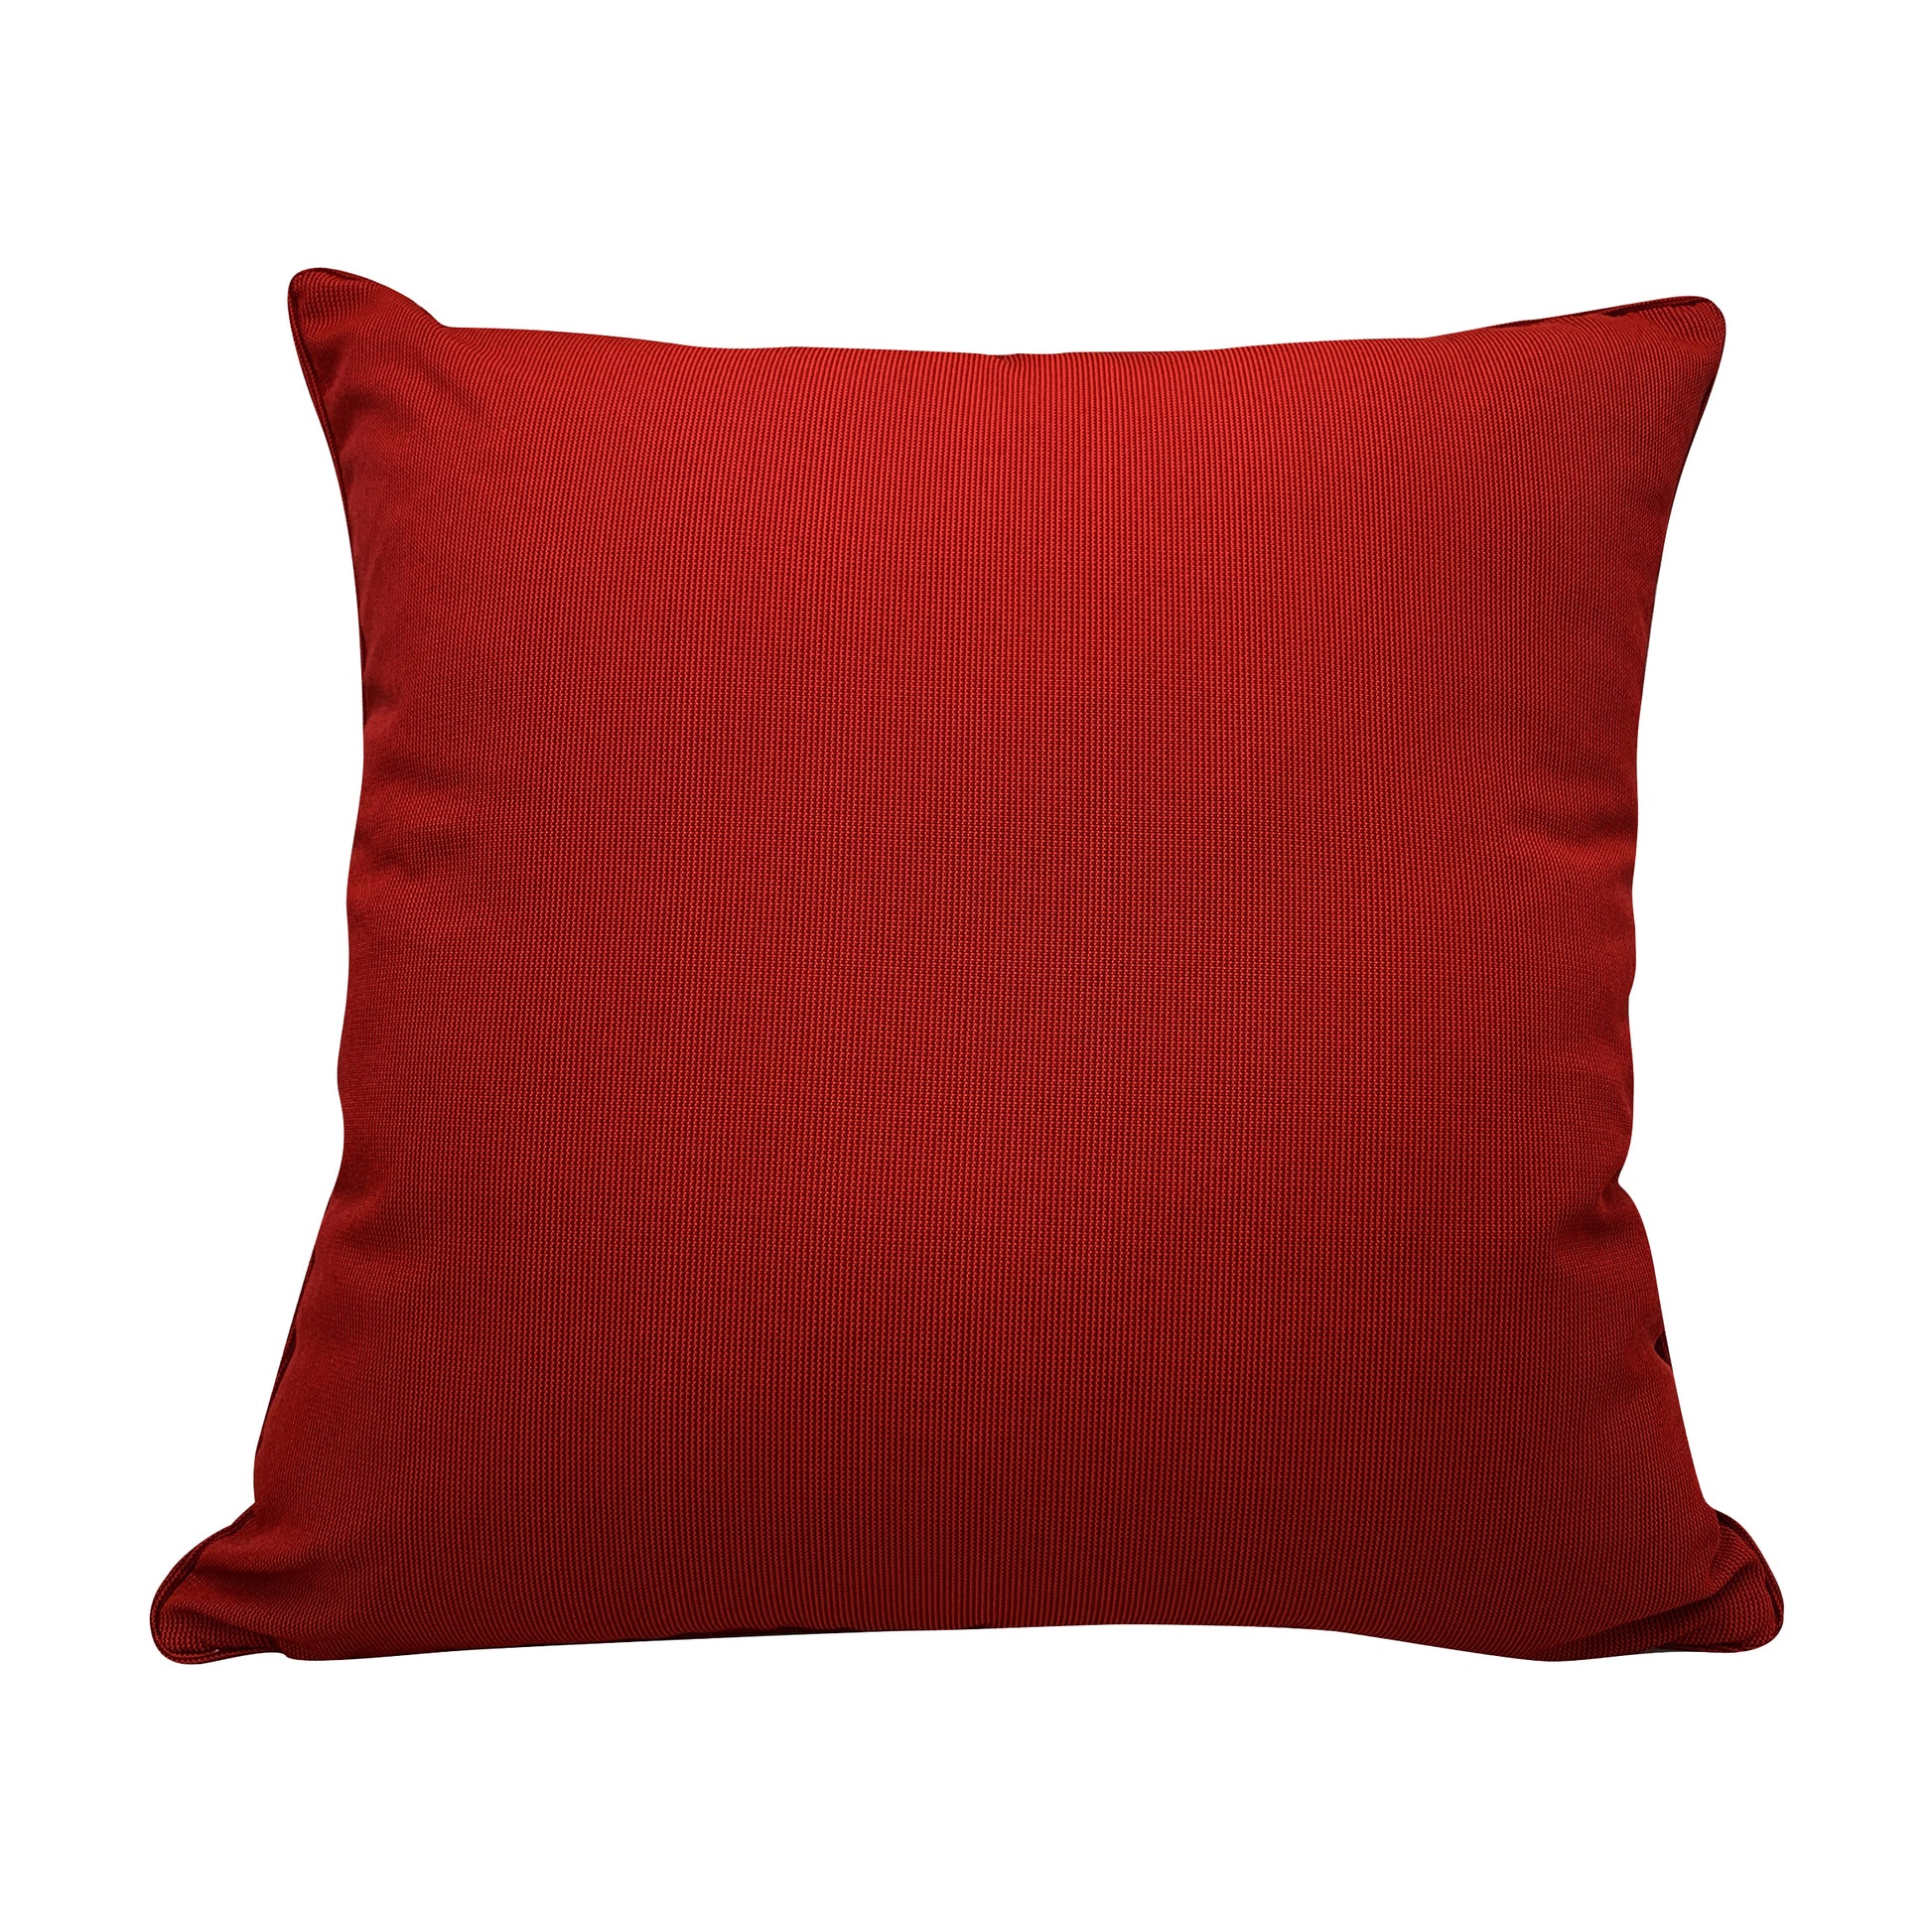 Solid red fabric; back of the Poppy Pattern Indoor Outdoor Pillow.